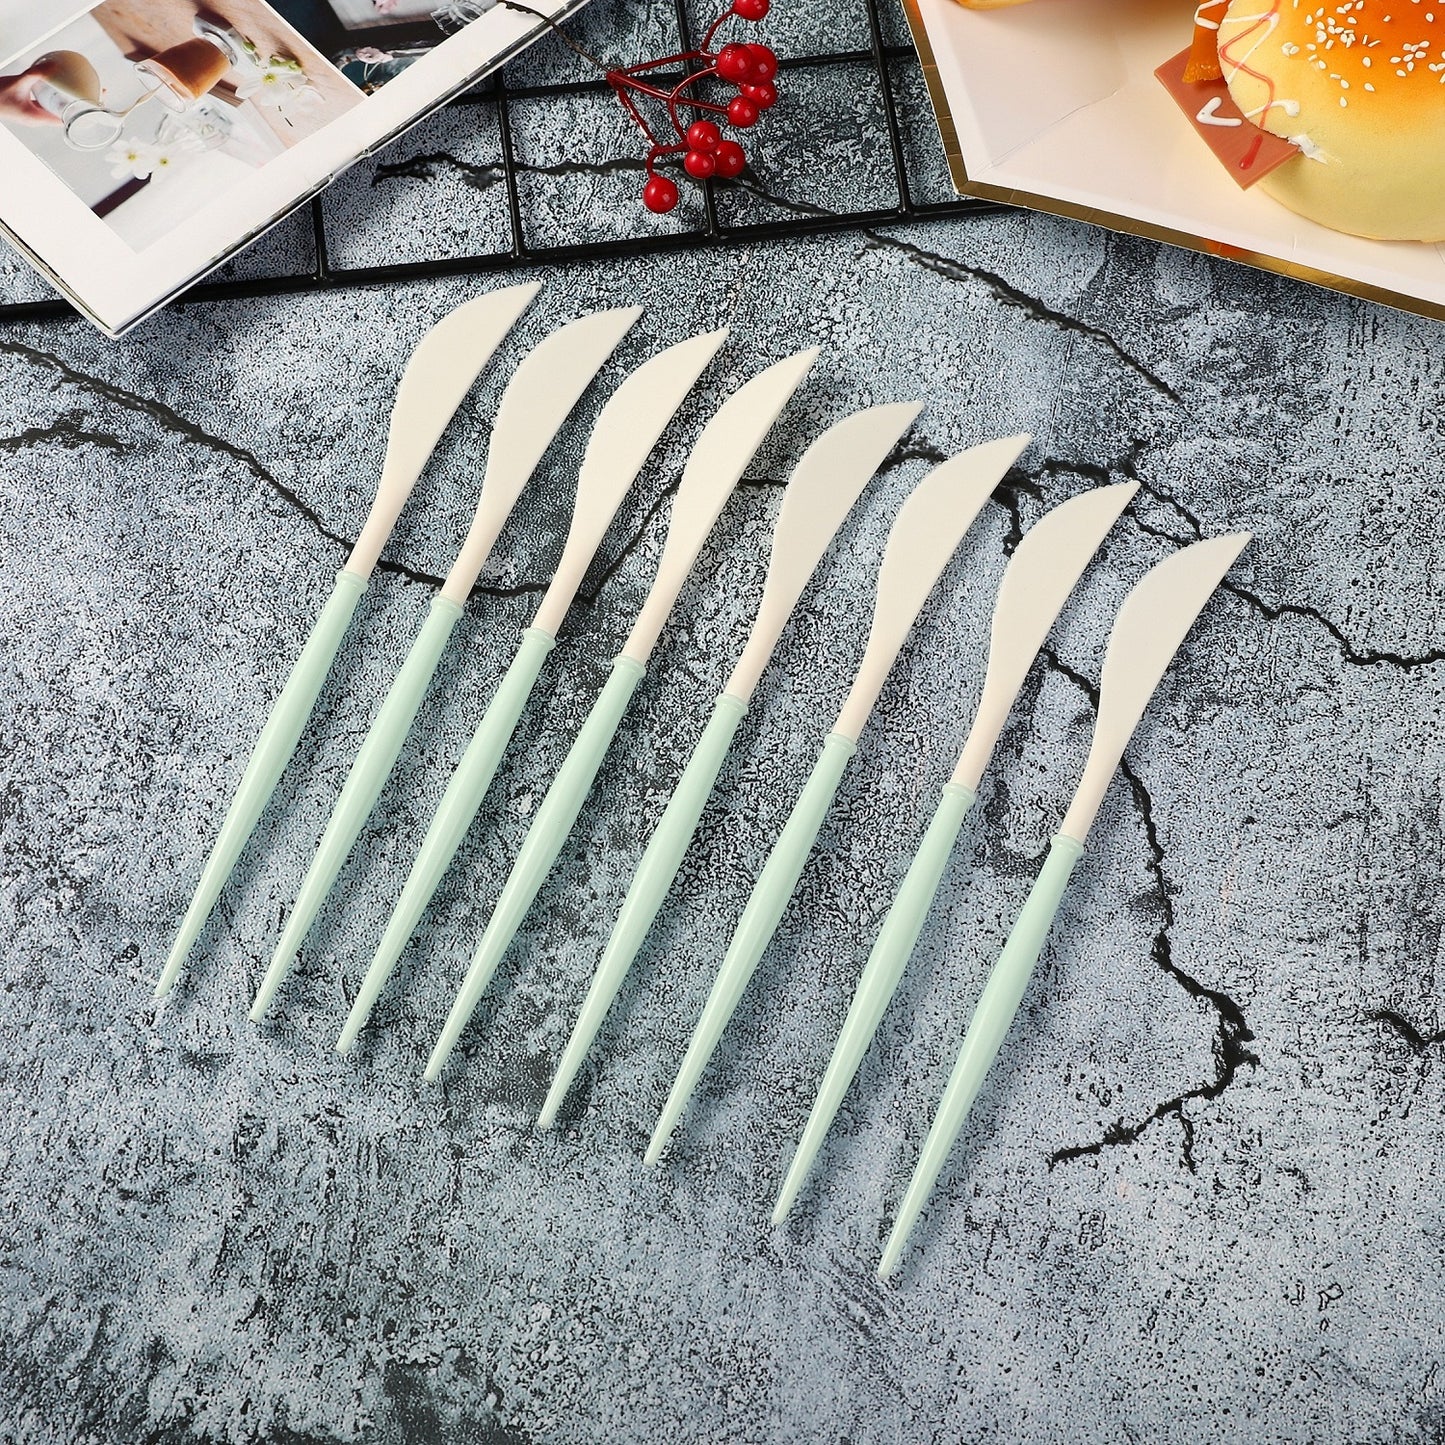 Green White 8PCs Disposable Cutlery Plastic Knife Forks Spoons Party Supplies Decoration For Camping BBQ Wedding Outdoor Birthday